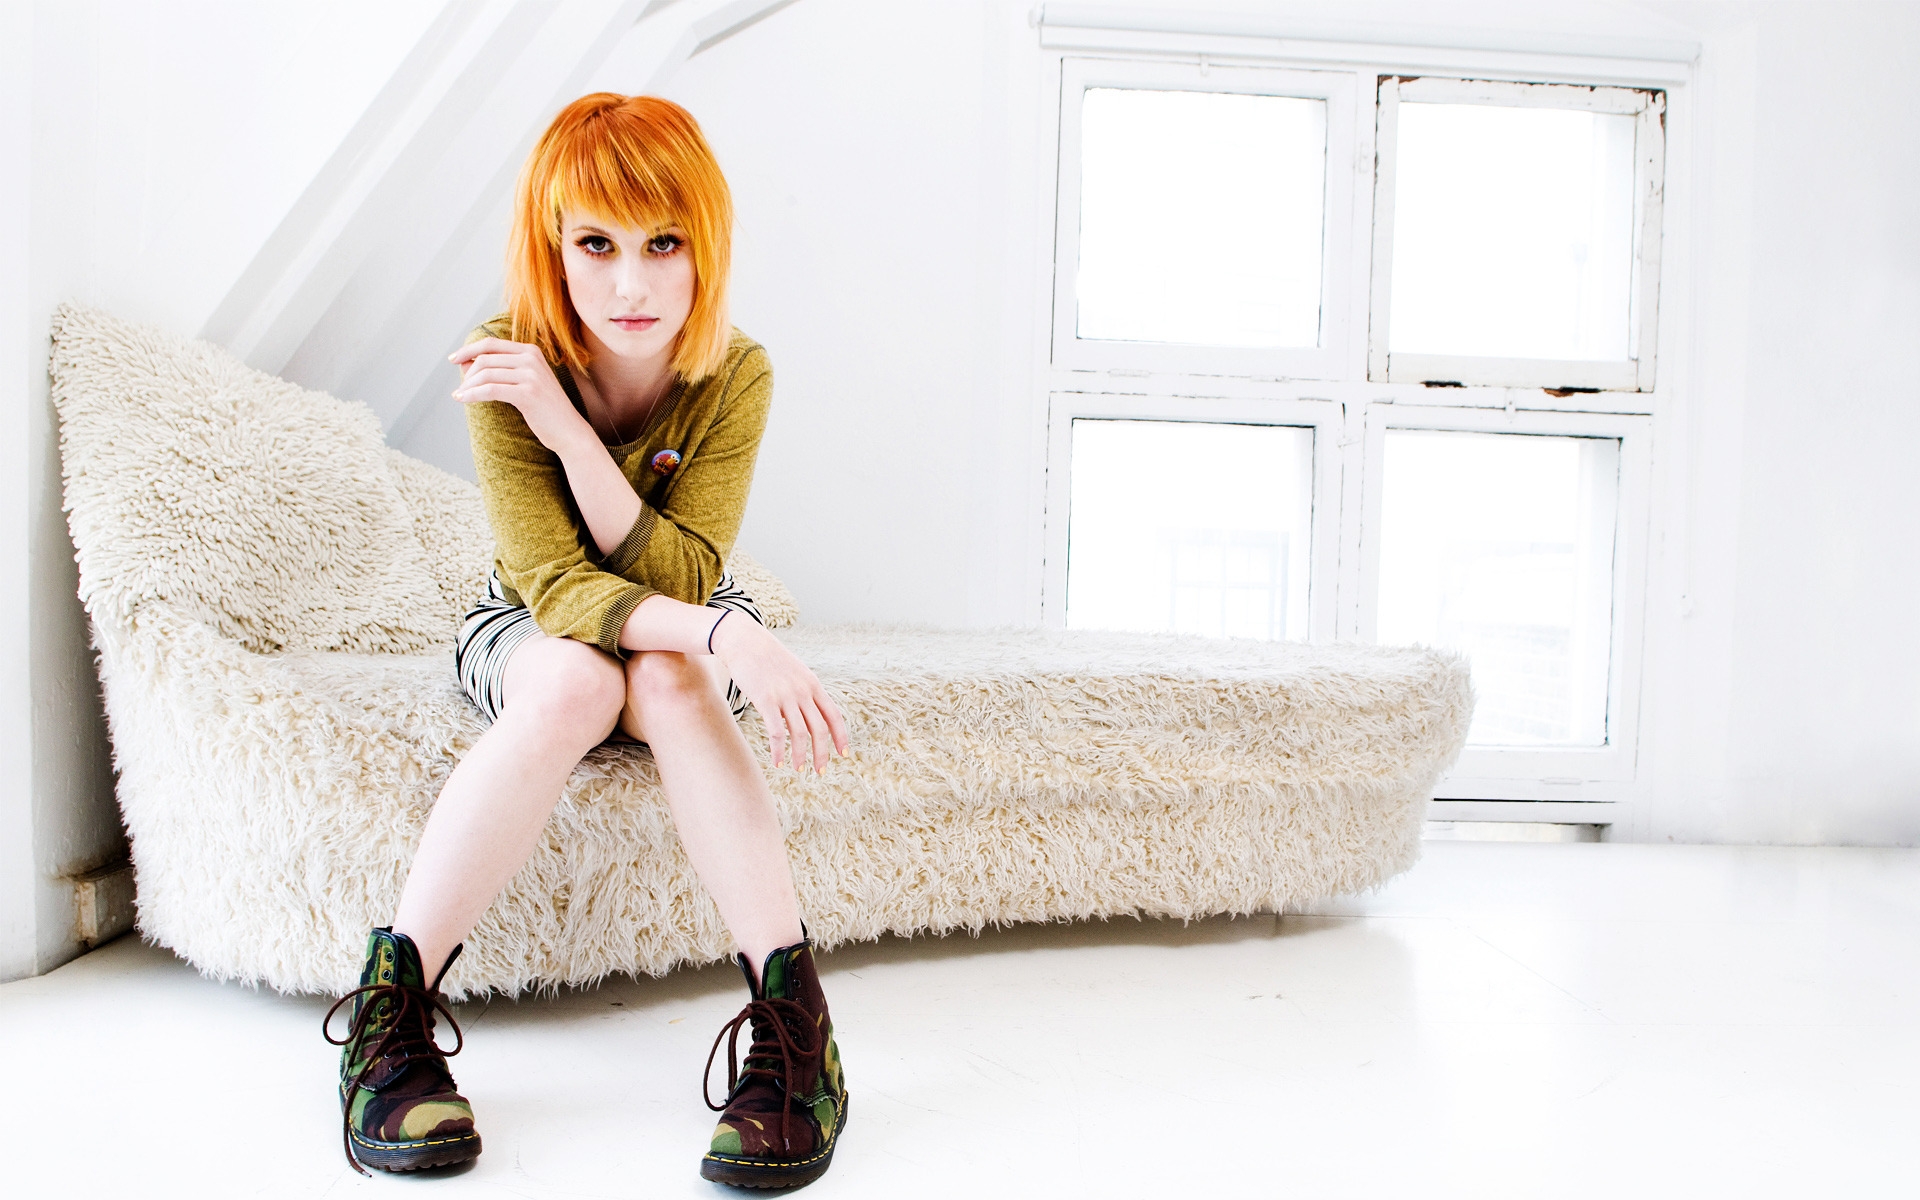 Hayley Nichole Williams for 1920 x 1200 widescreen resolution